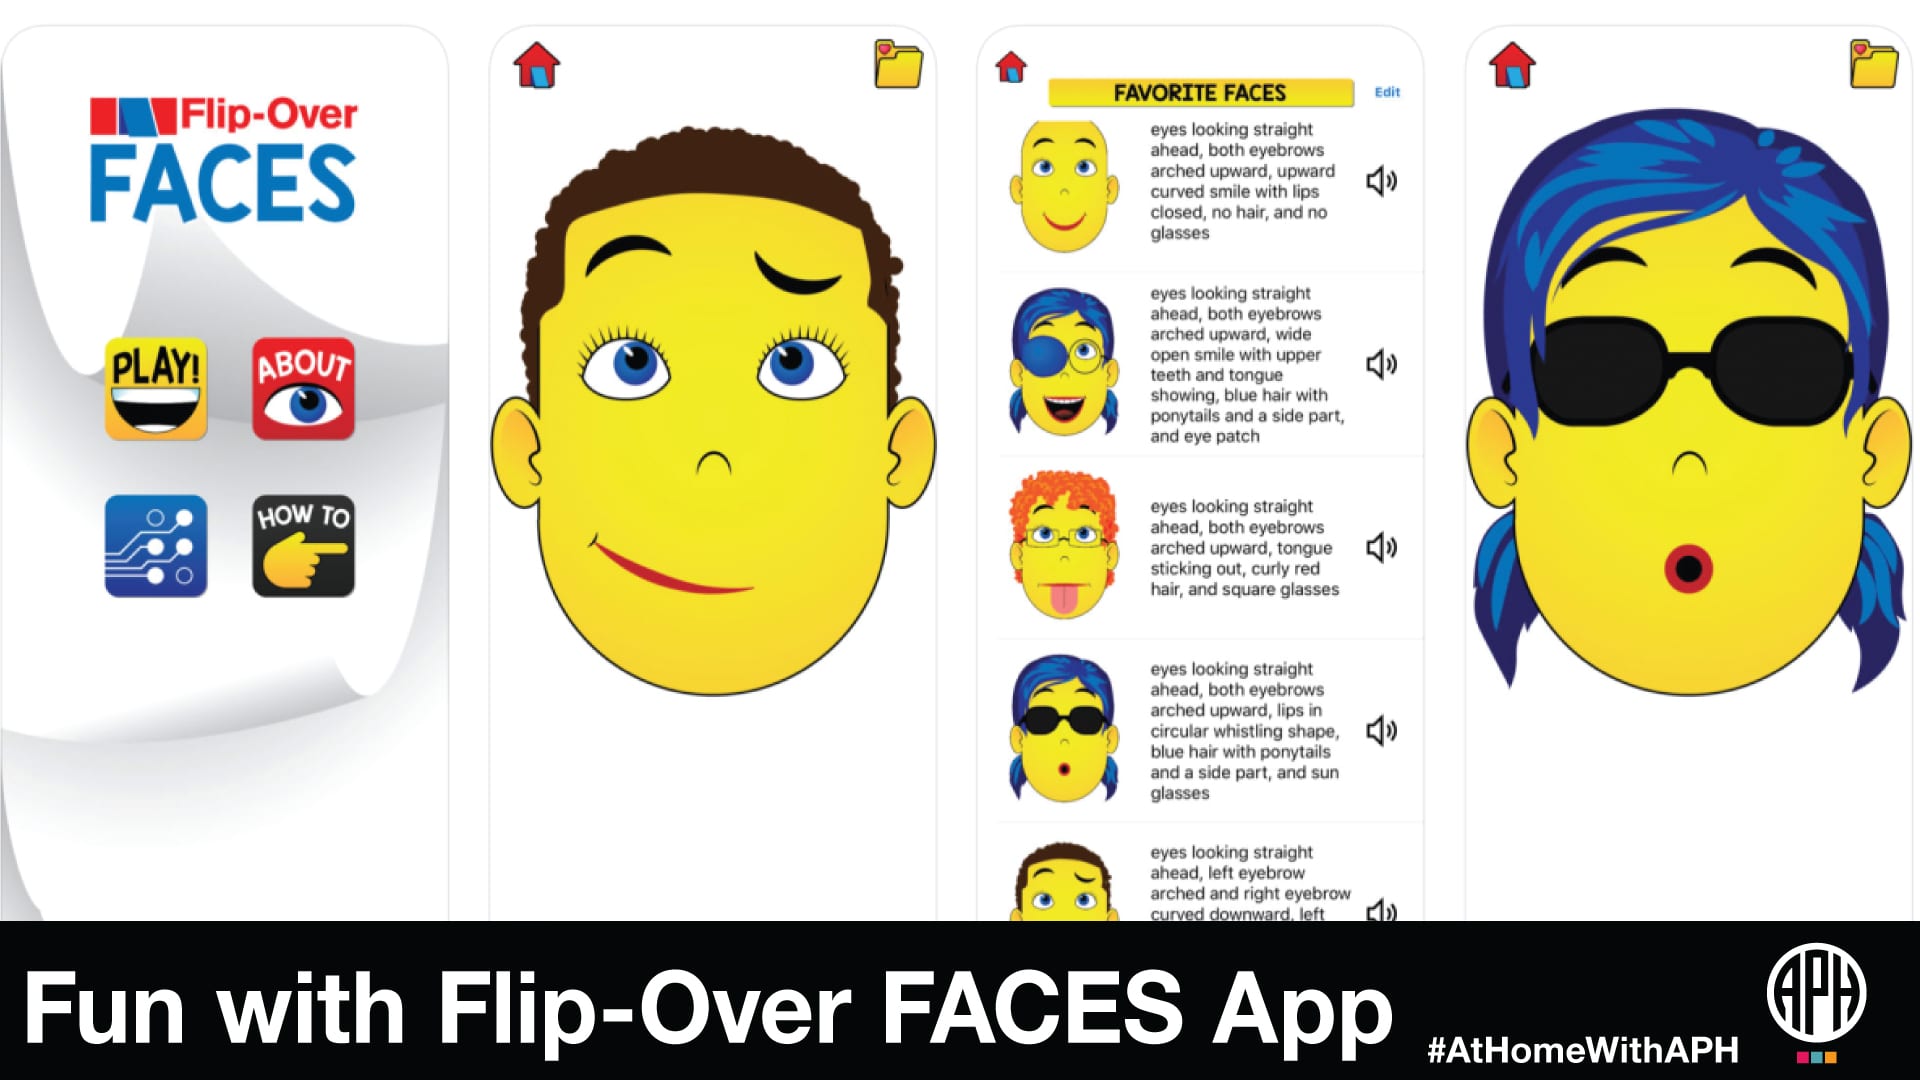 screen grabs of the Flip-Over FACES app including examples of the facial expressions that can be made. Text reads "Fun with Flip-Over FACES App #AtHomeWithAPH